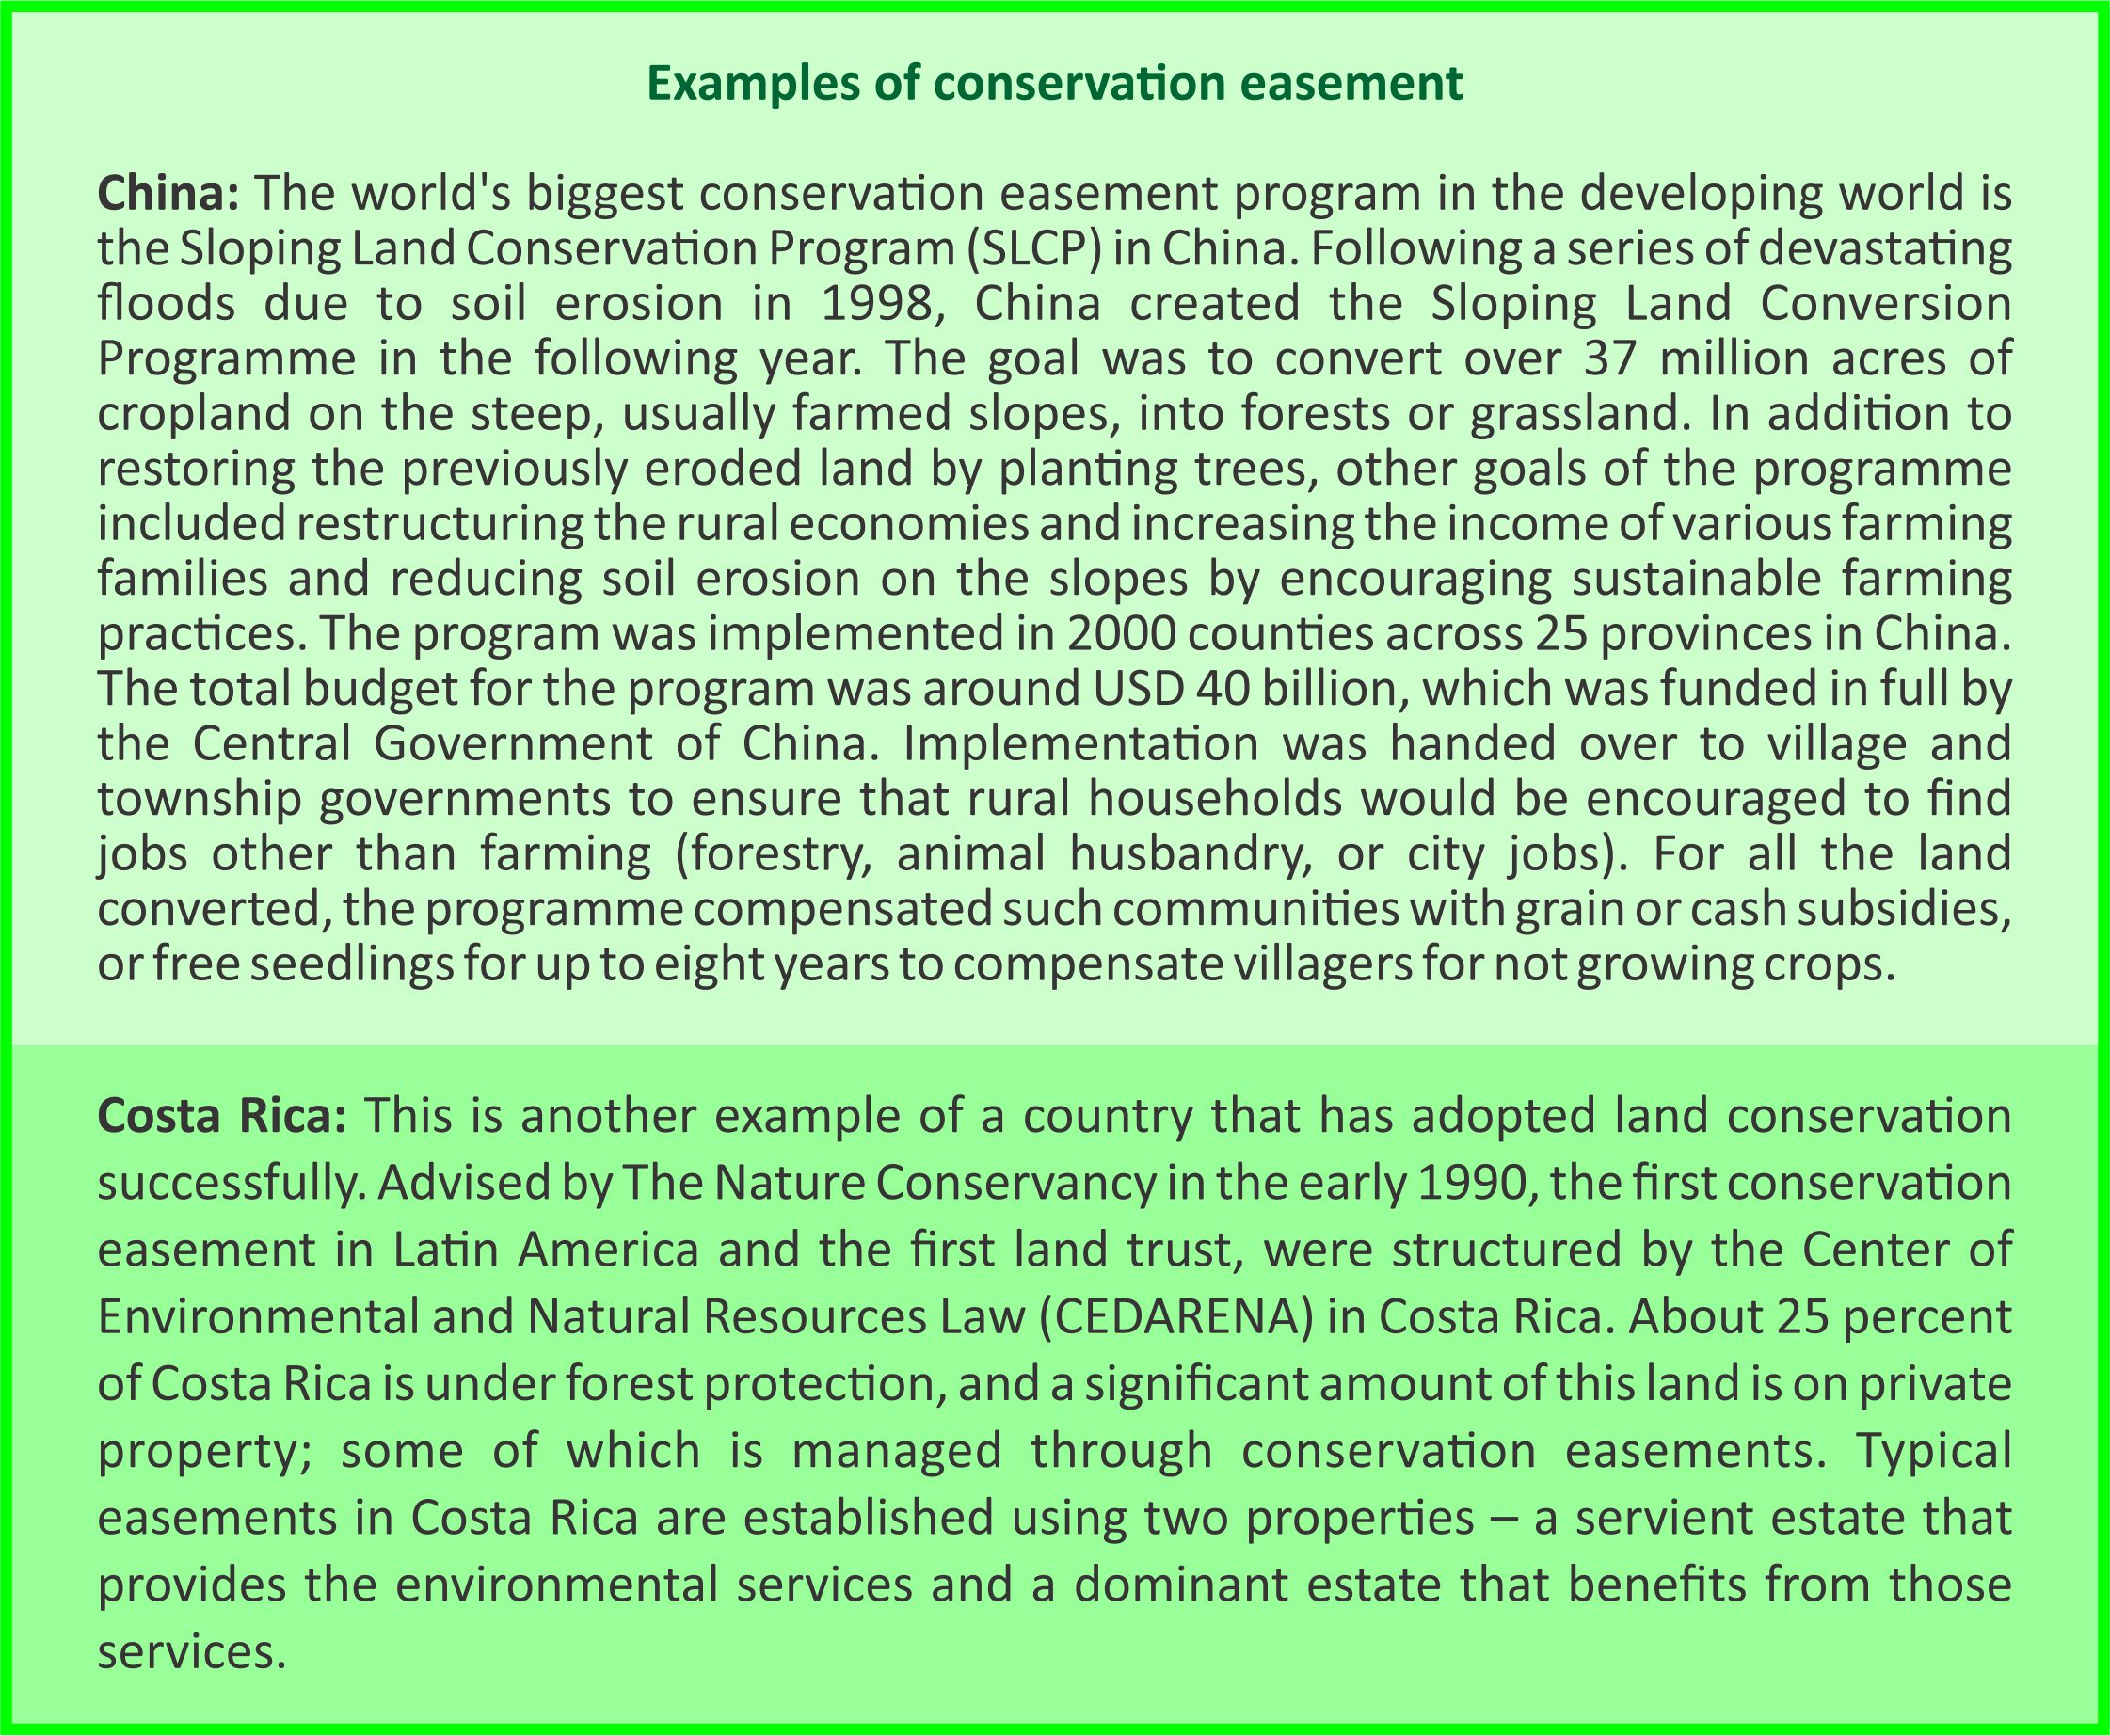 Conservation easements as a tool to implement REDD+